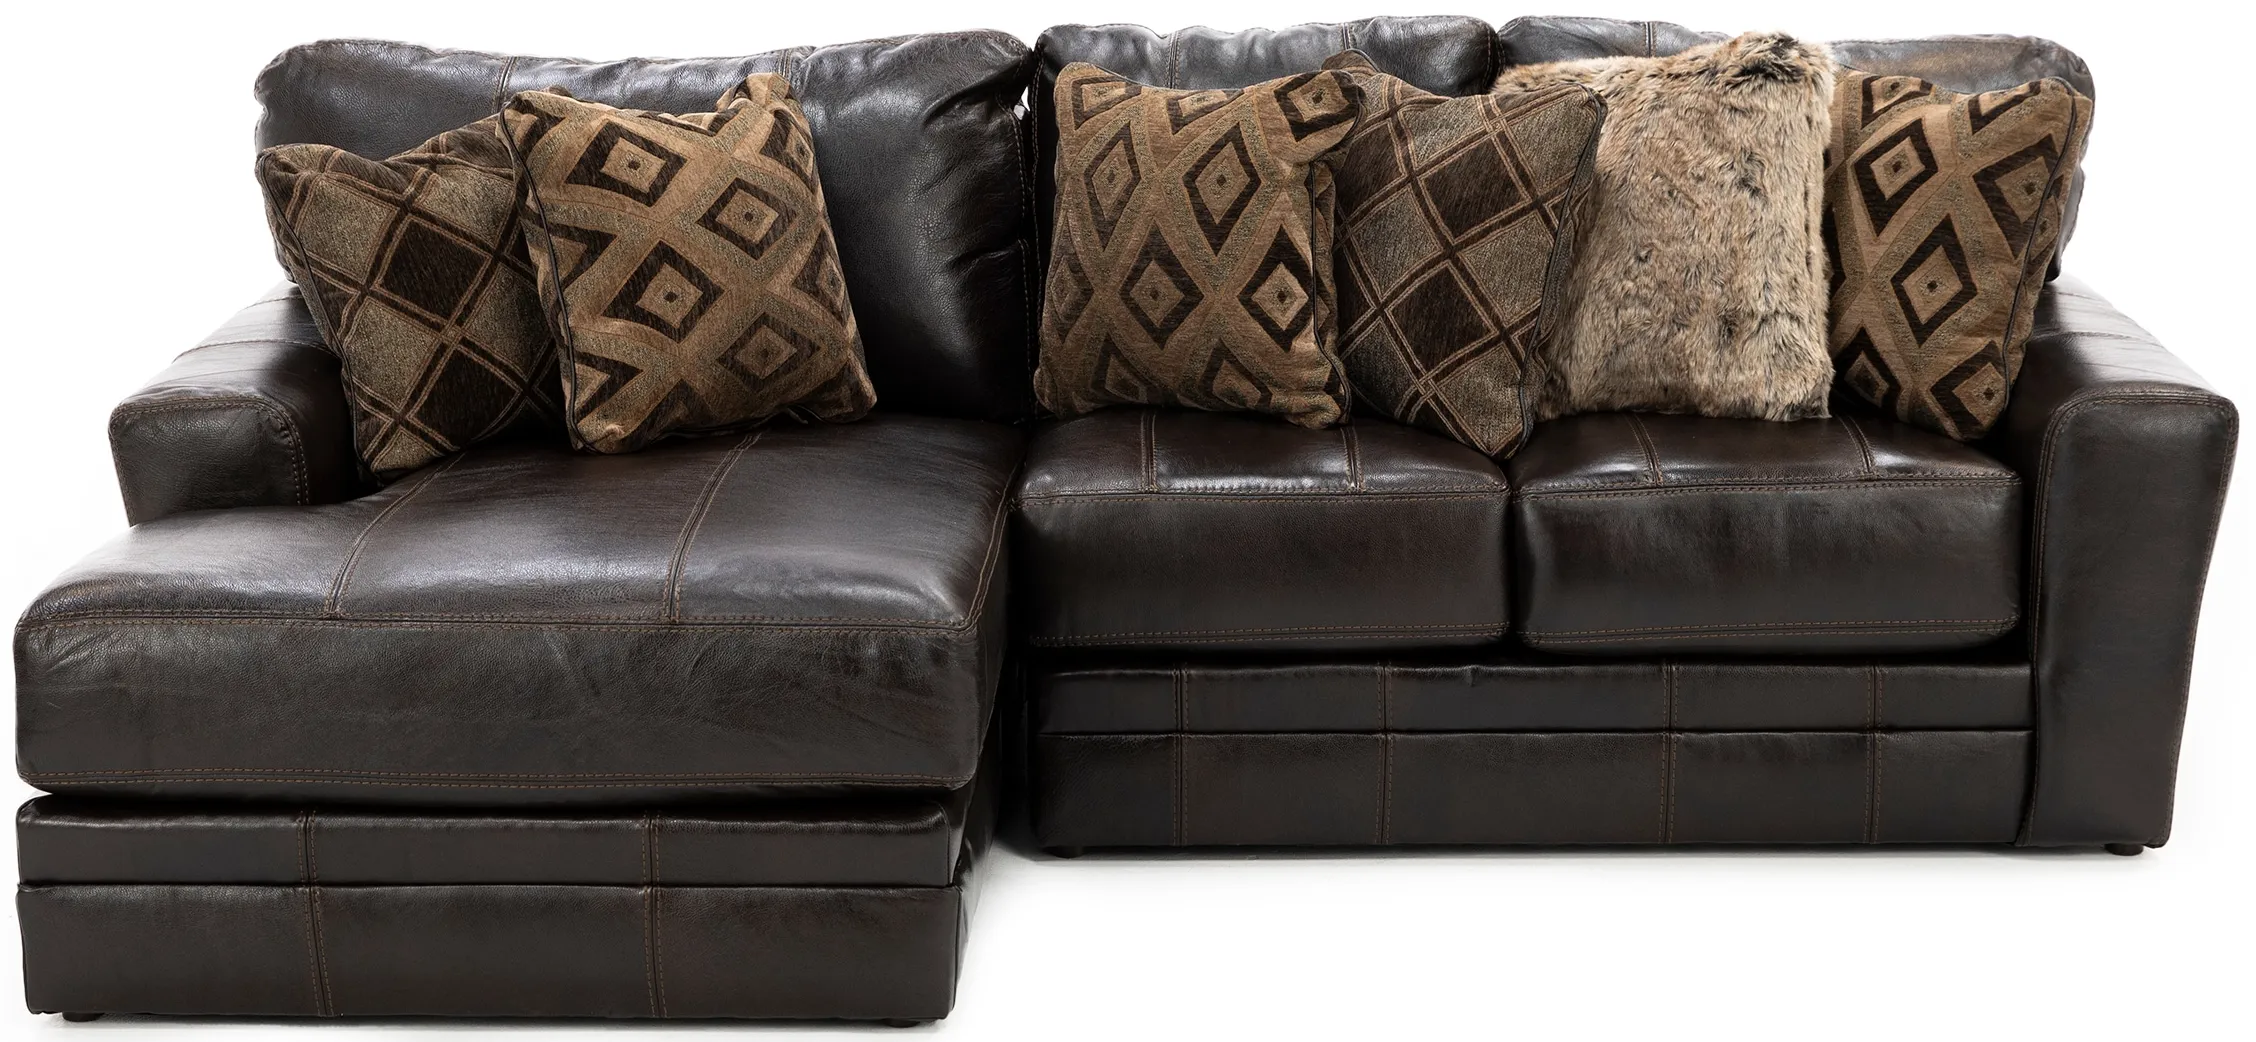 Camden 2-Pc. Leather Sectional with Left Arm Facing Chaise in Chocolate